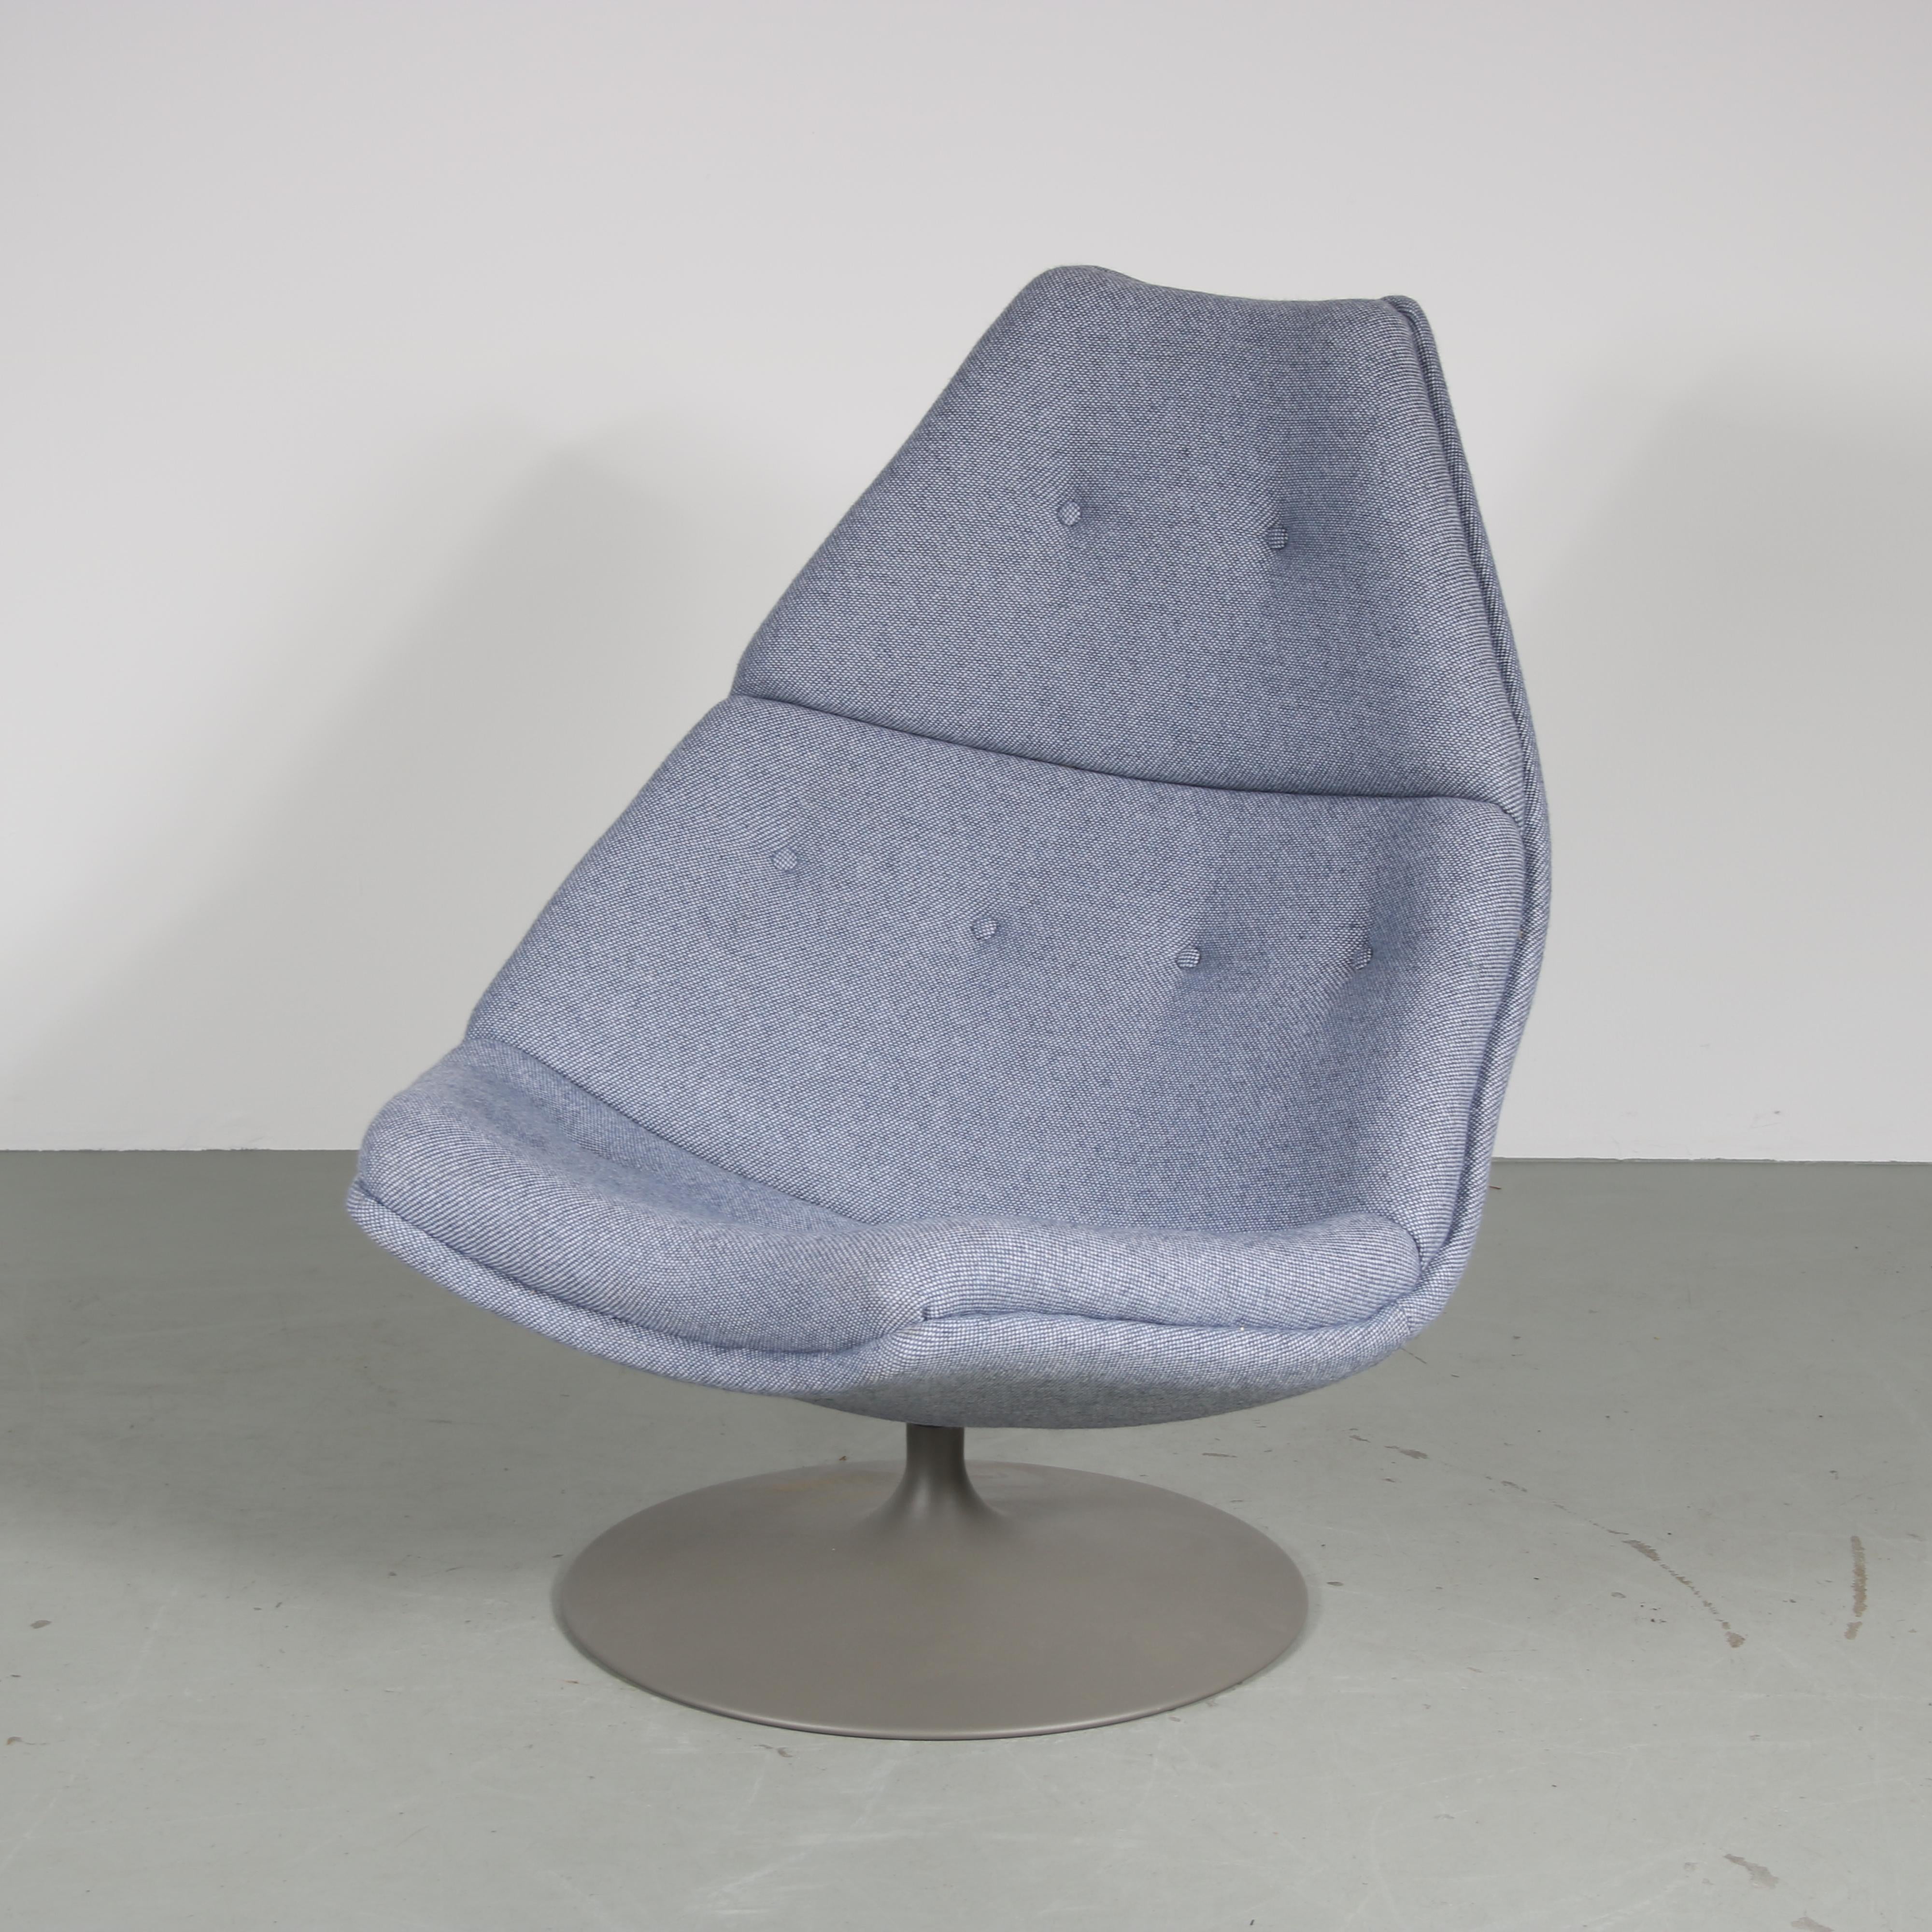 A beautiful lounge chair designed by Geoffrey Harcourt, manufactured by Artifort in the Netherlands around 1960.

This iconic piece, model 588, is a highly recognizable piece of mid-century design! The large, rounded seat gives an excellent seating